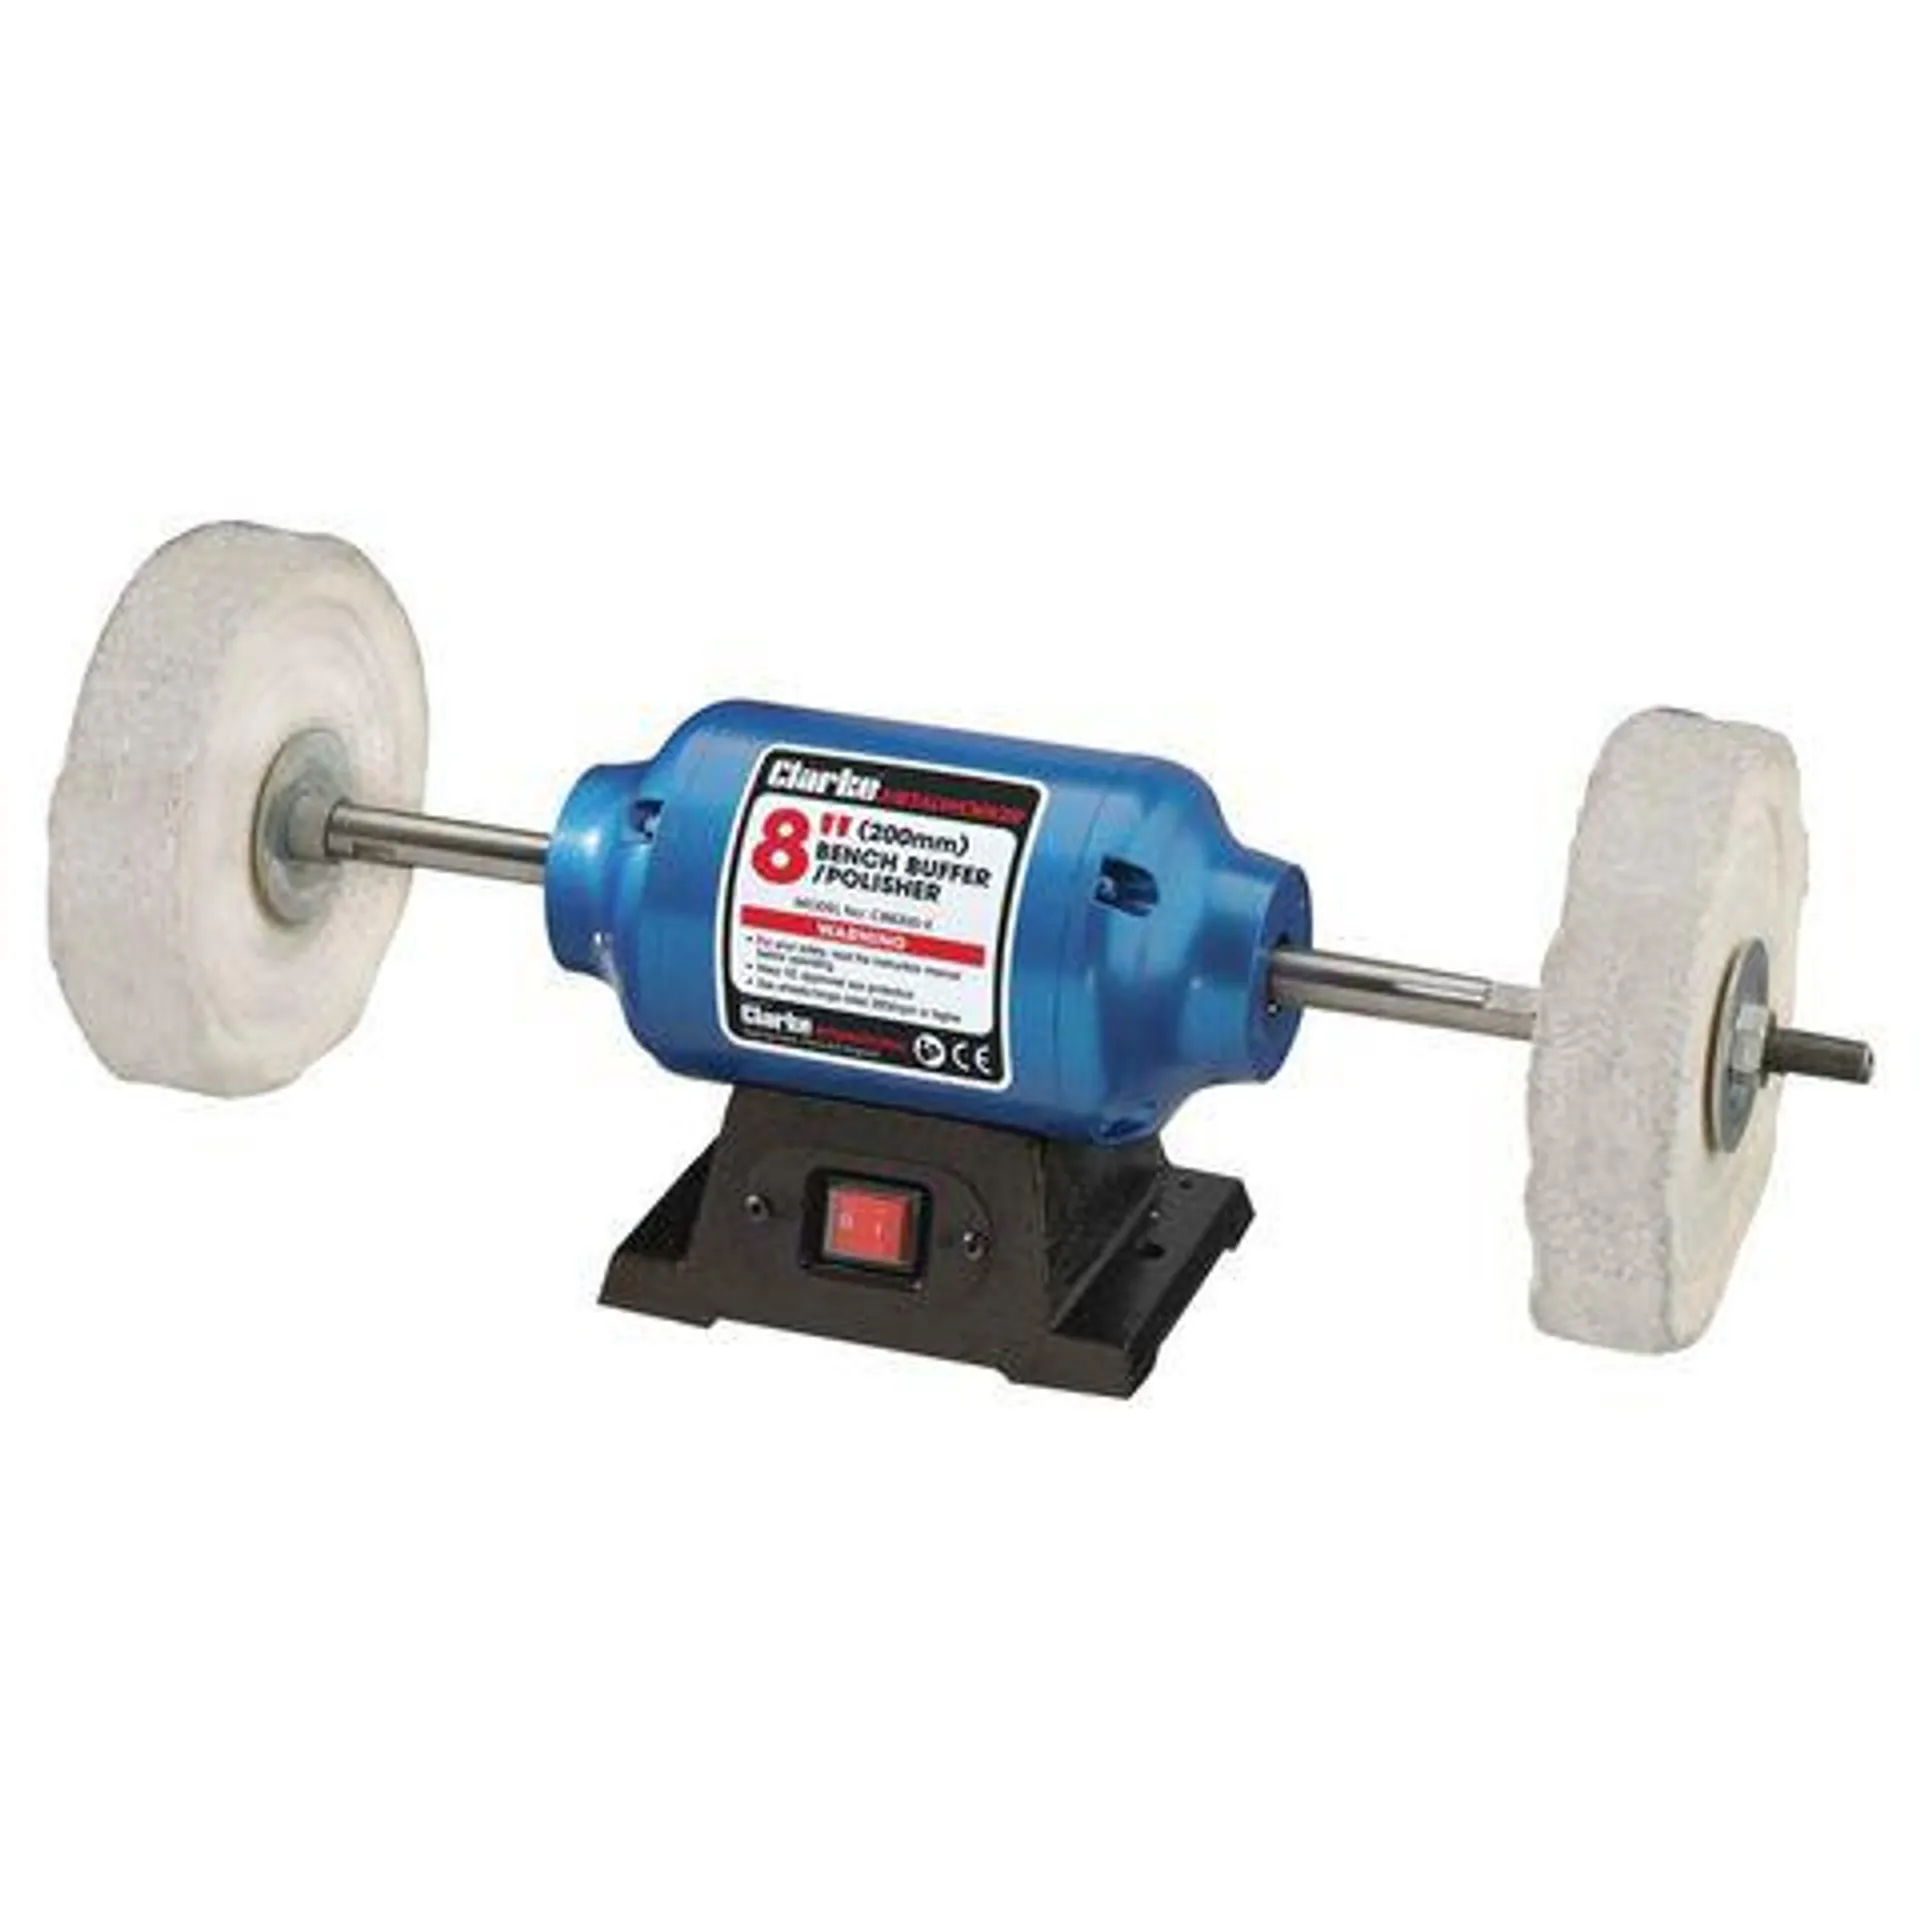 Clarke CBB200-E 200mm Bench Buffer/Polisher with Extended Spindles (230V)